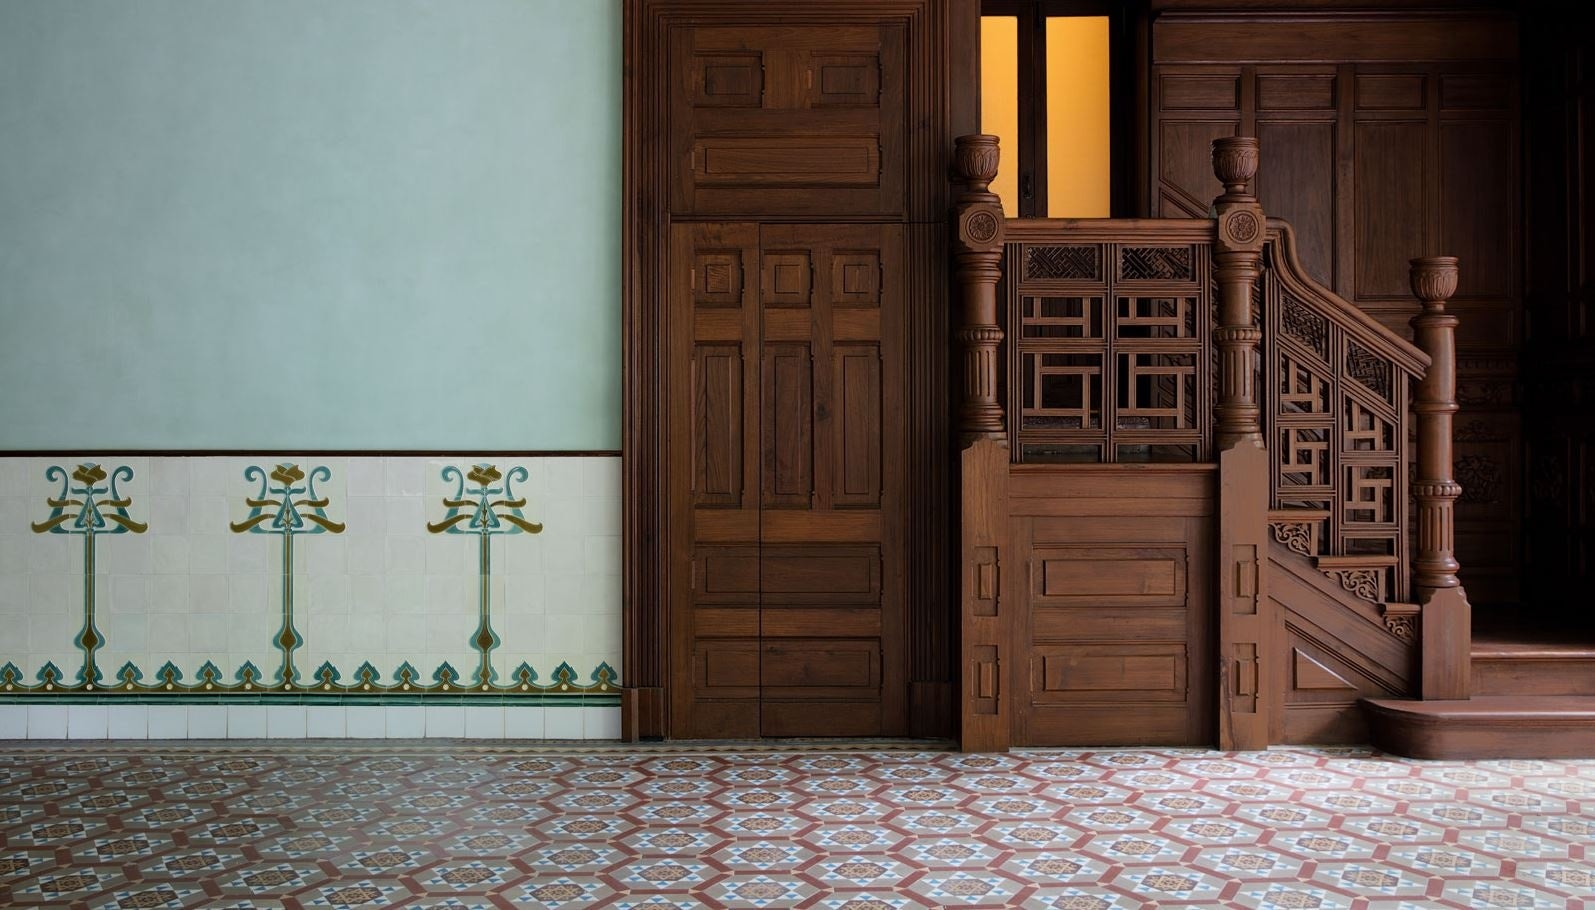 Prada restored a 1918 historical residence in Shanghai, Rong Zhai, which has become a new cultural center in the city. Photo: Prada's corporate blog